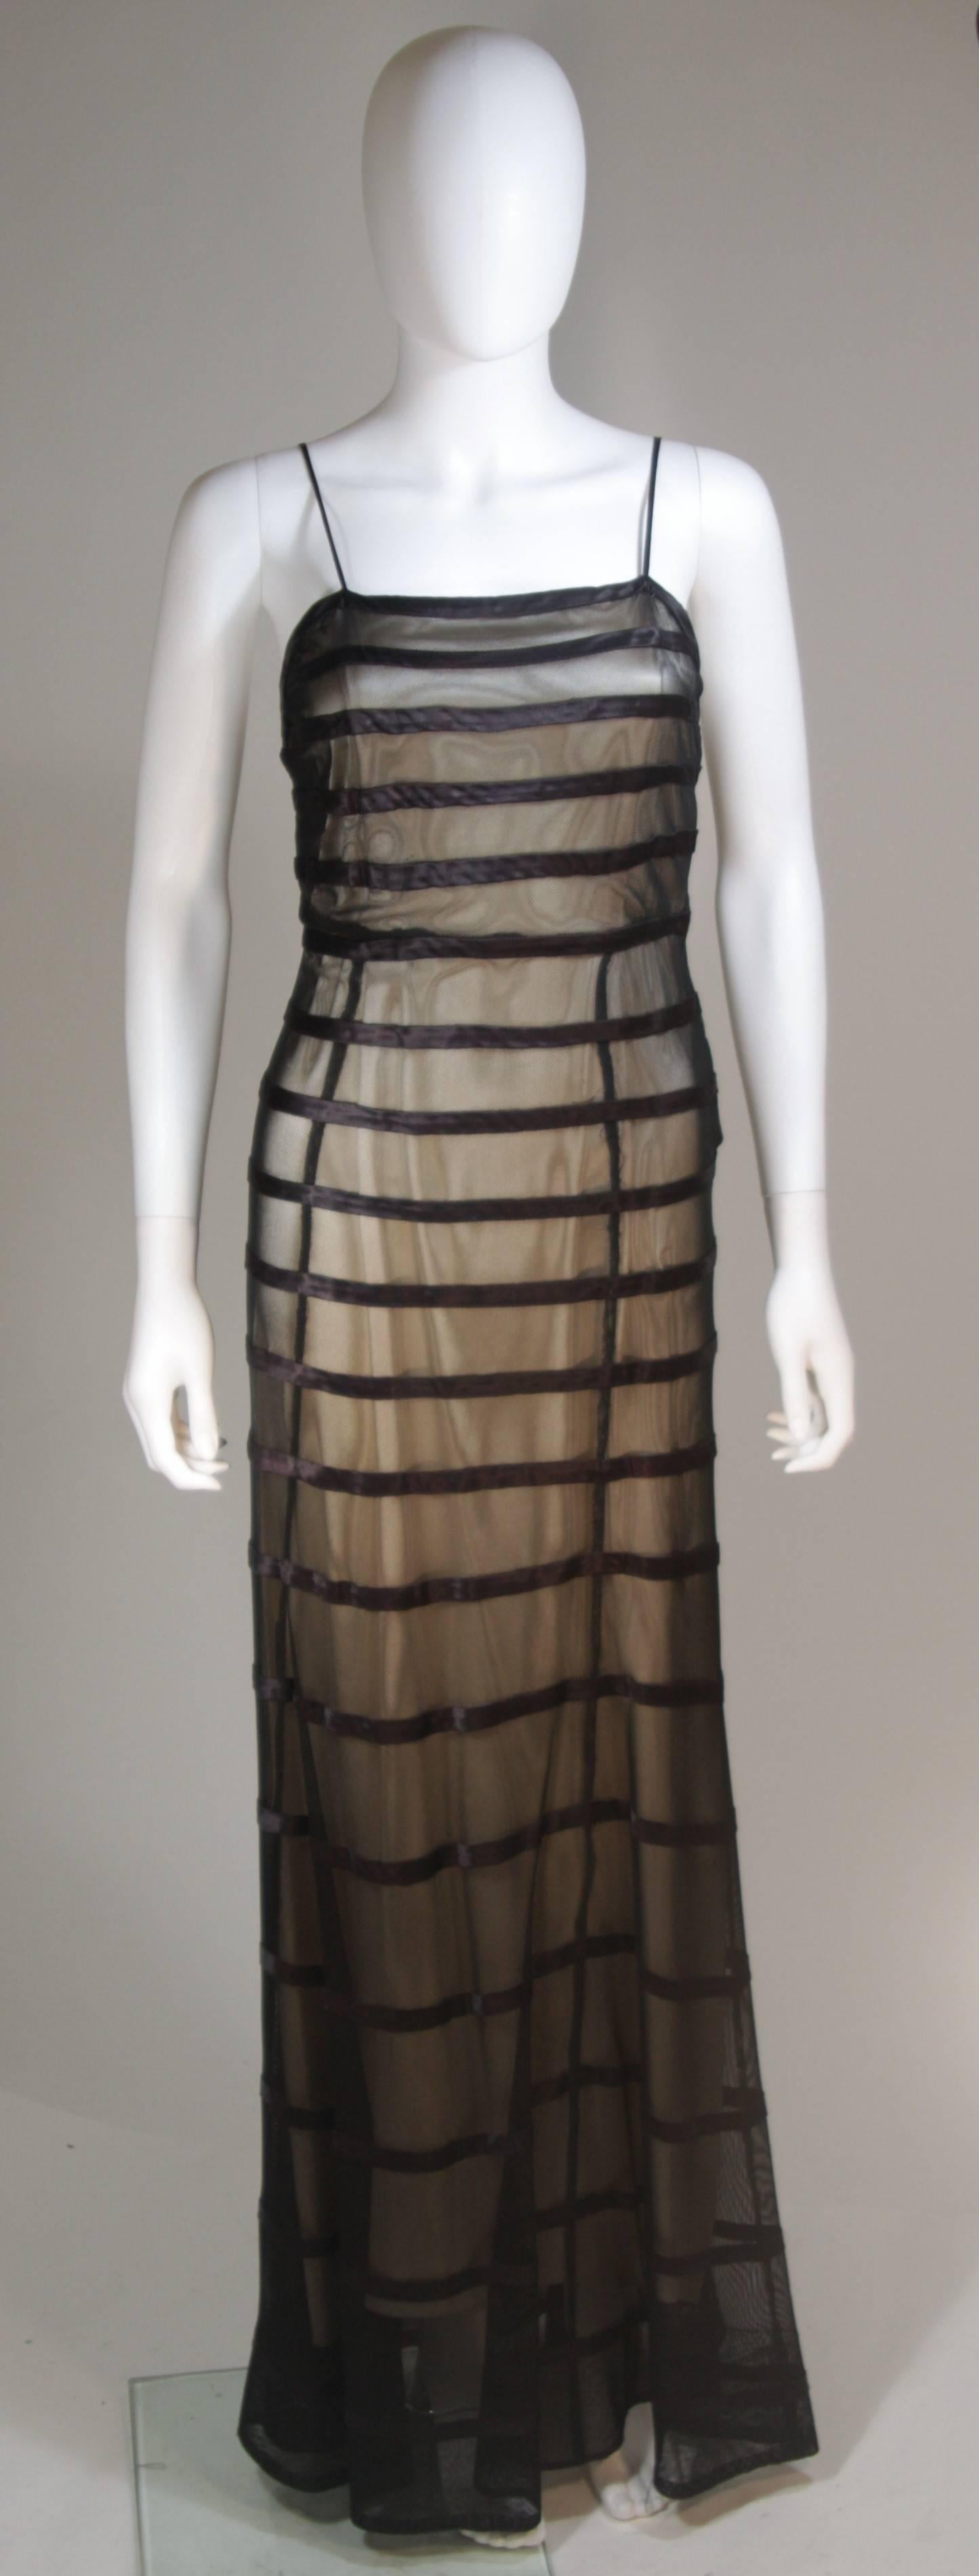  This 1930's  gown is composed of a sheer mesh fabric with silk accents and nude slip. There are snap closures. In excellent vintage condition.

  **Please cross-reference measurements for personal accuracy. Size in description box is an